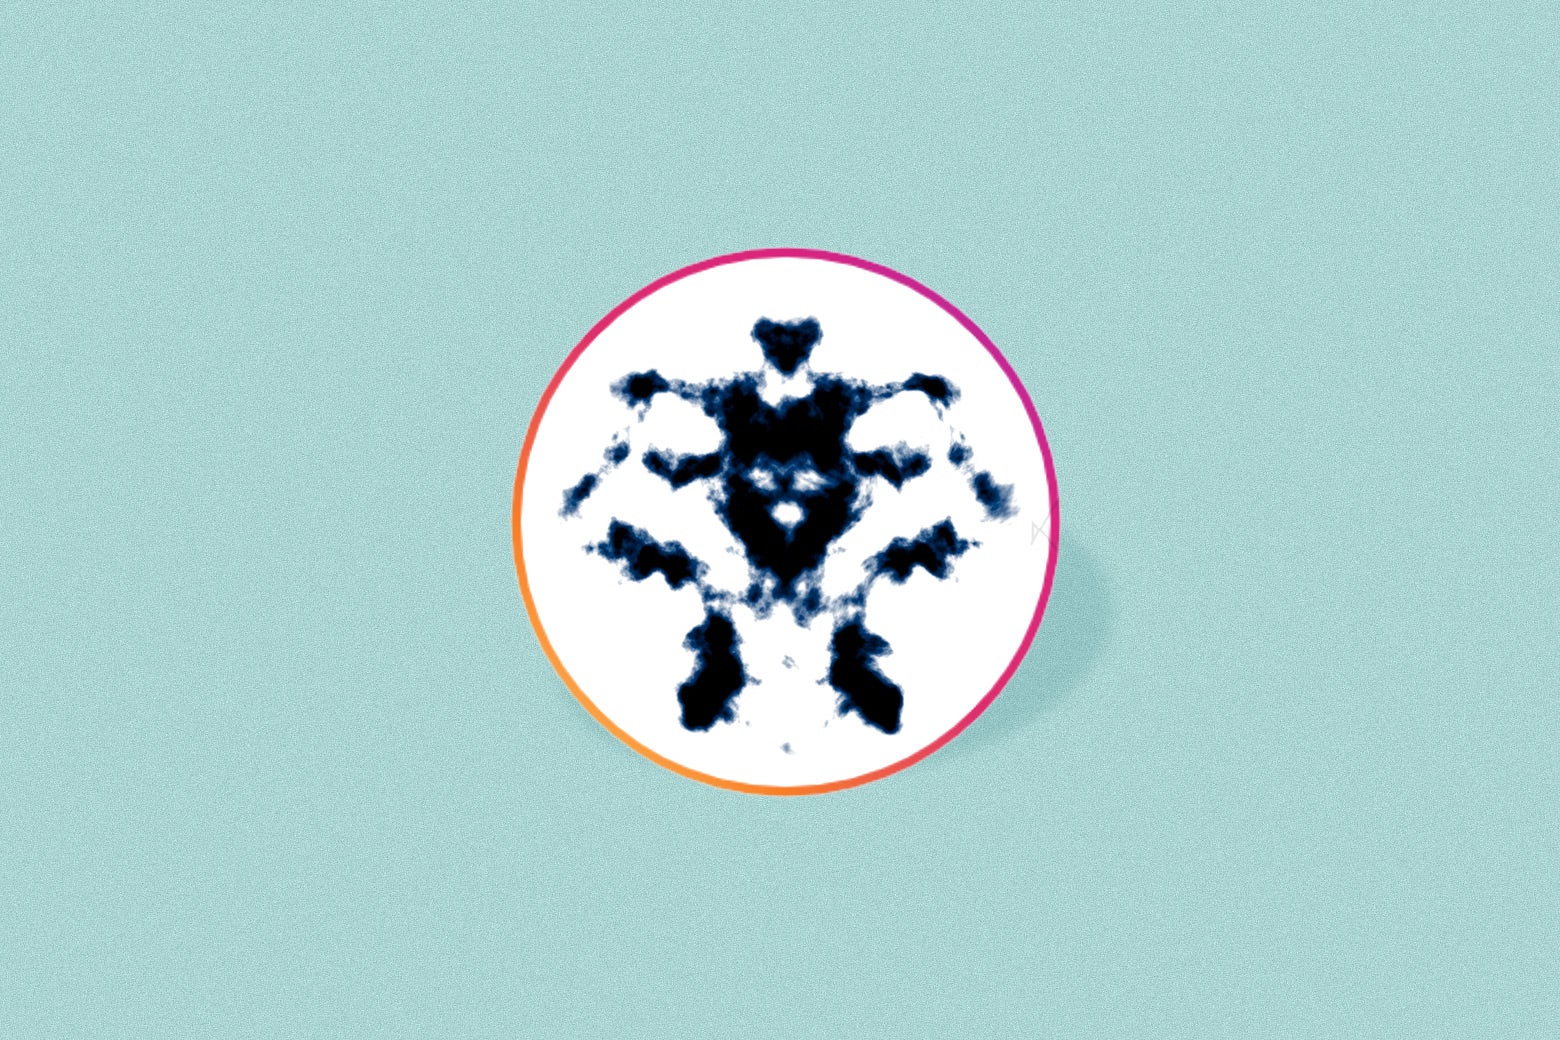 A Rorschach test is seen within a colorful circle.